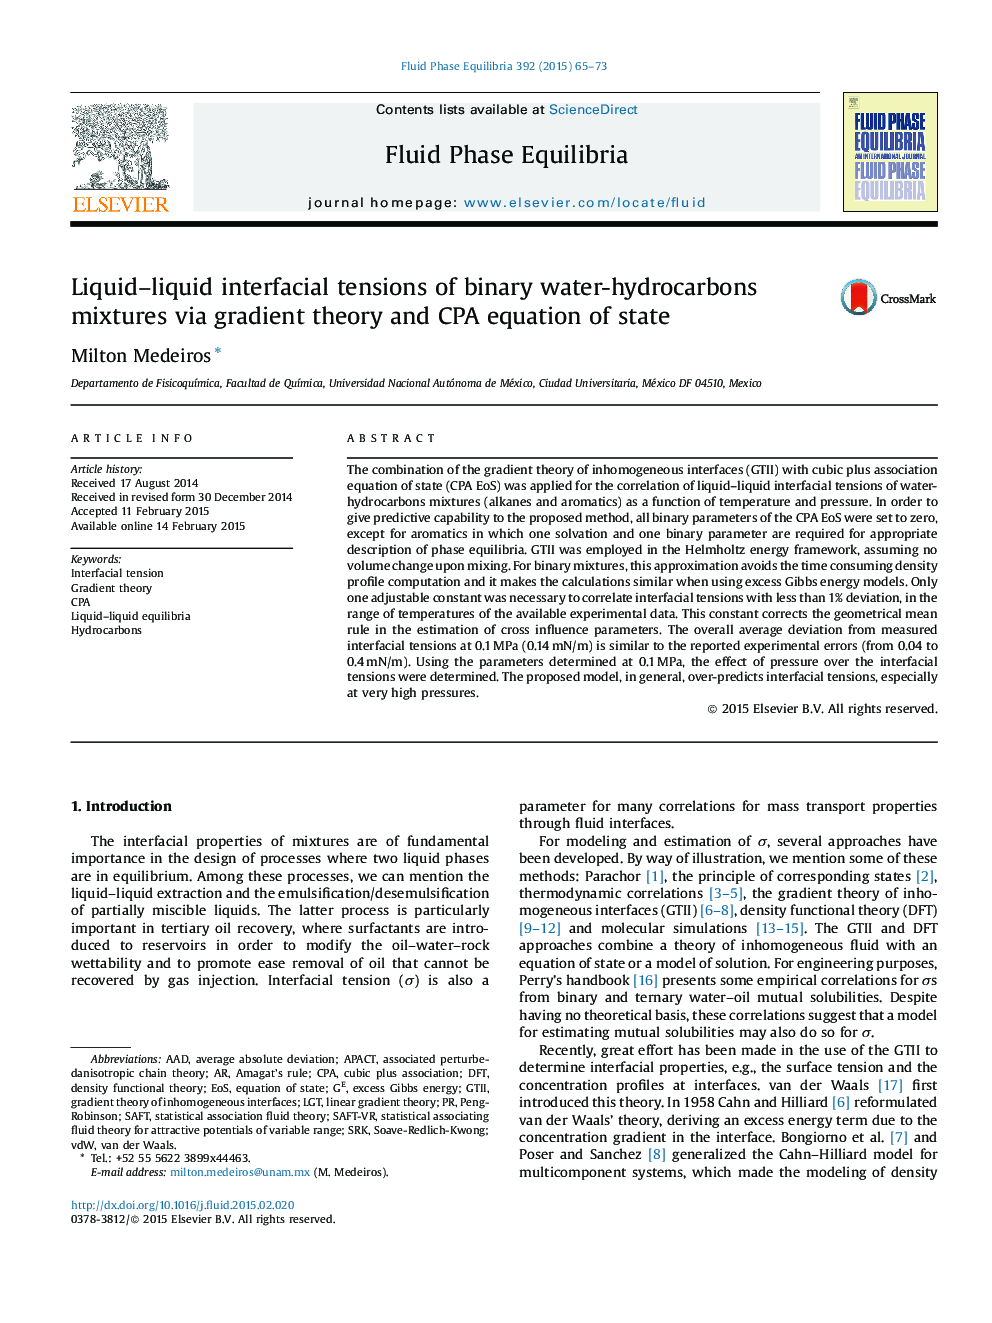 Liquid–liquid interfacial tensions of binary water-hydrocarbons mixtures via gradient theory and CPA equation of state